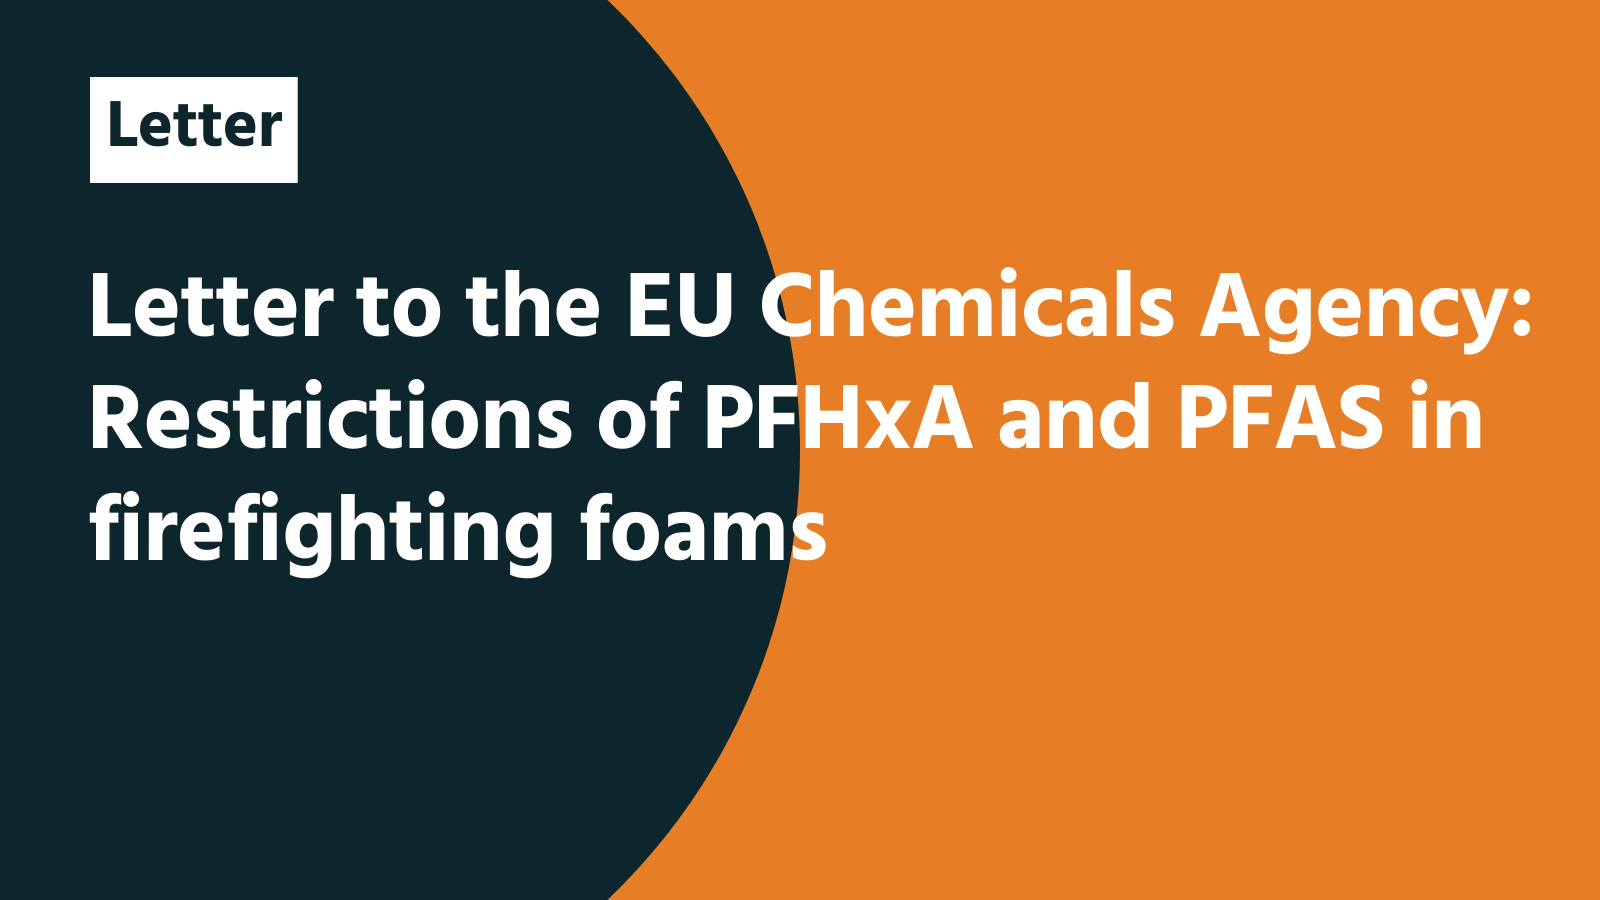 Letter to the EU Chemicals Agency: Restrictions of PFHxA and PFAS in firefighting foams